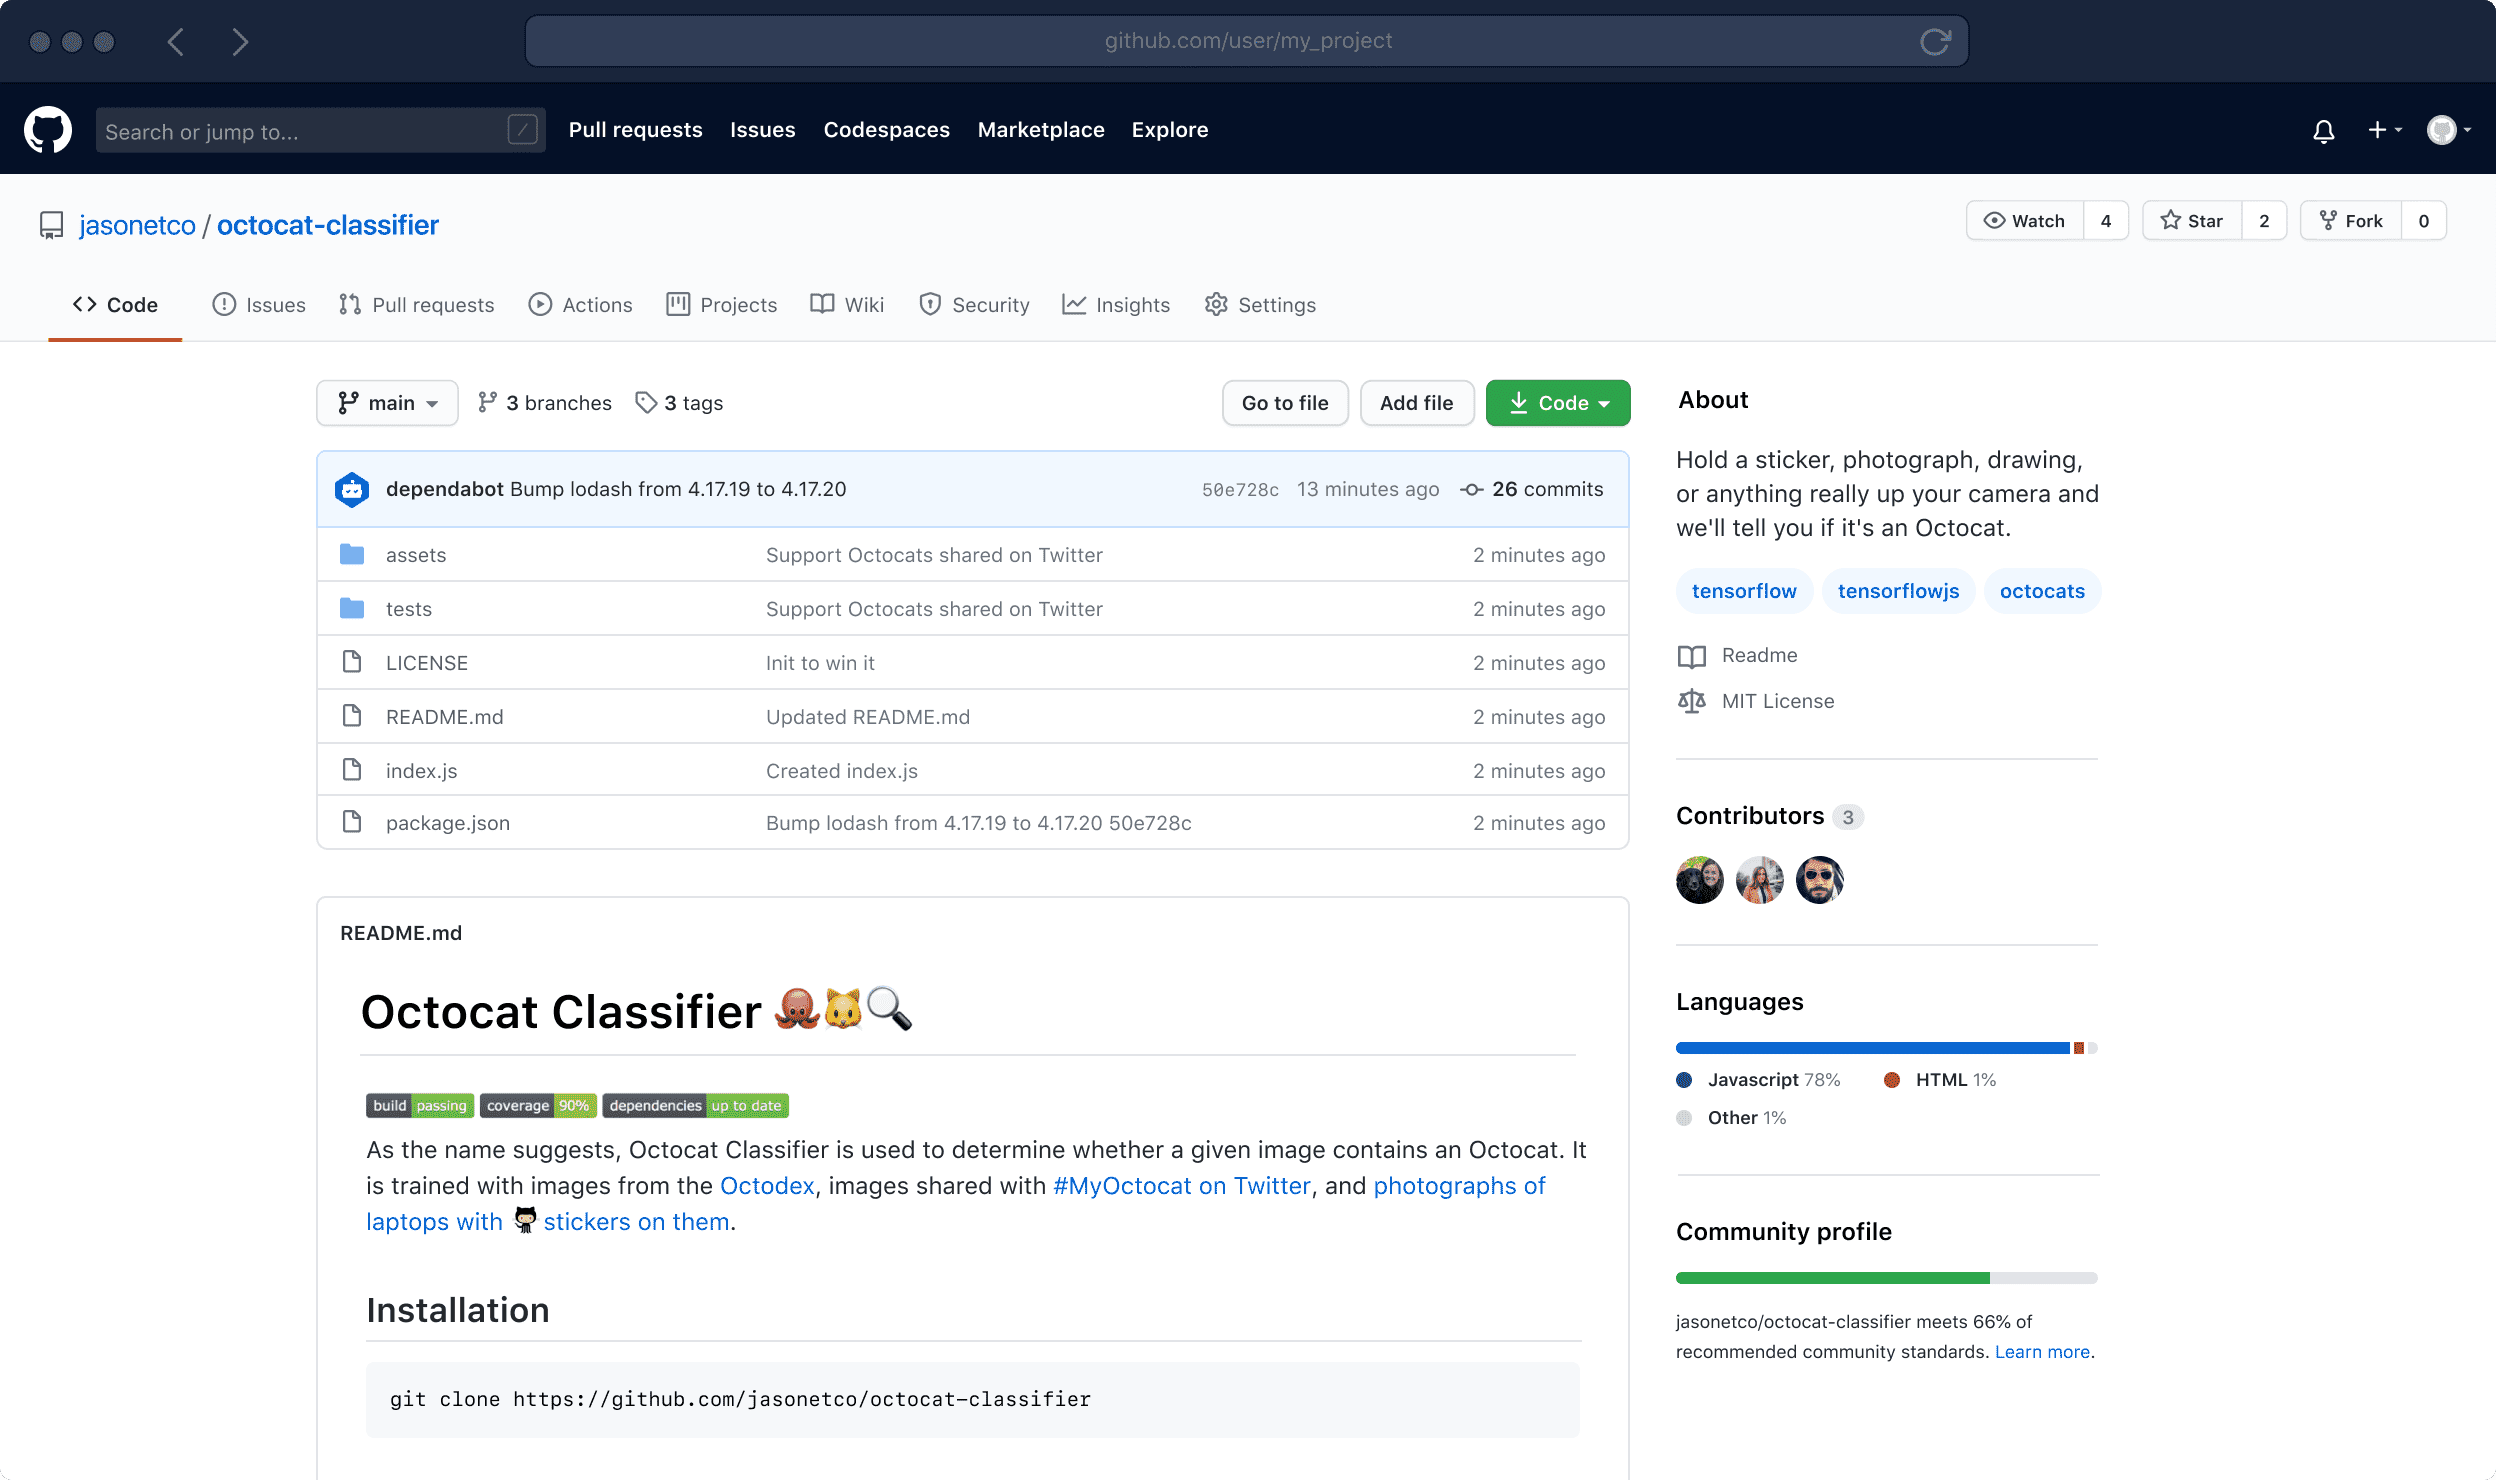 The resulting GitHub repository page from pushing